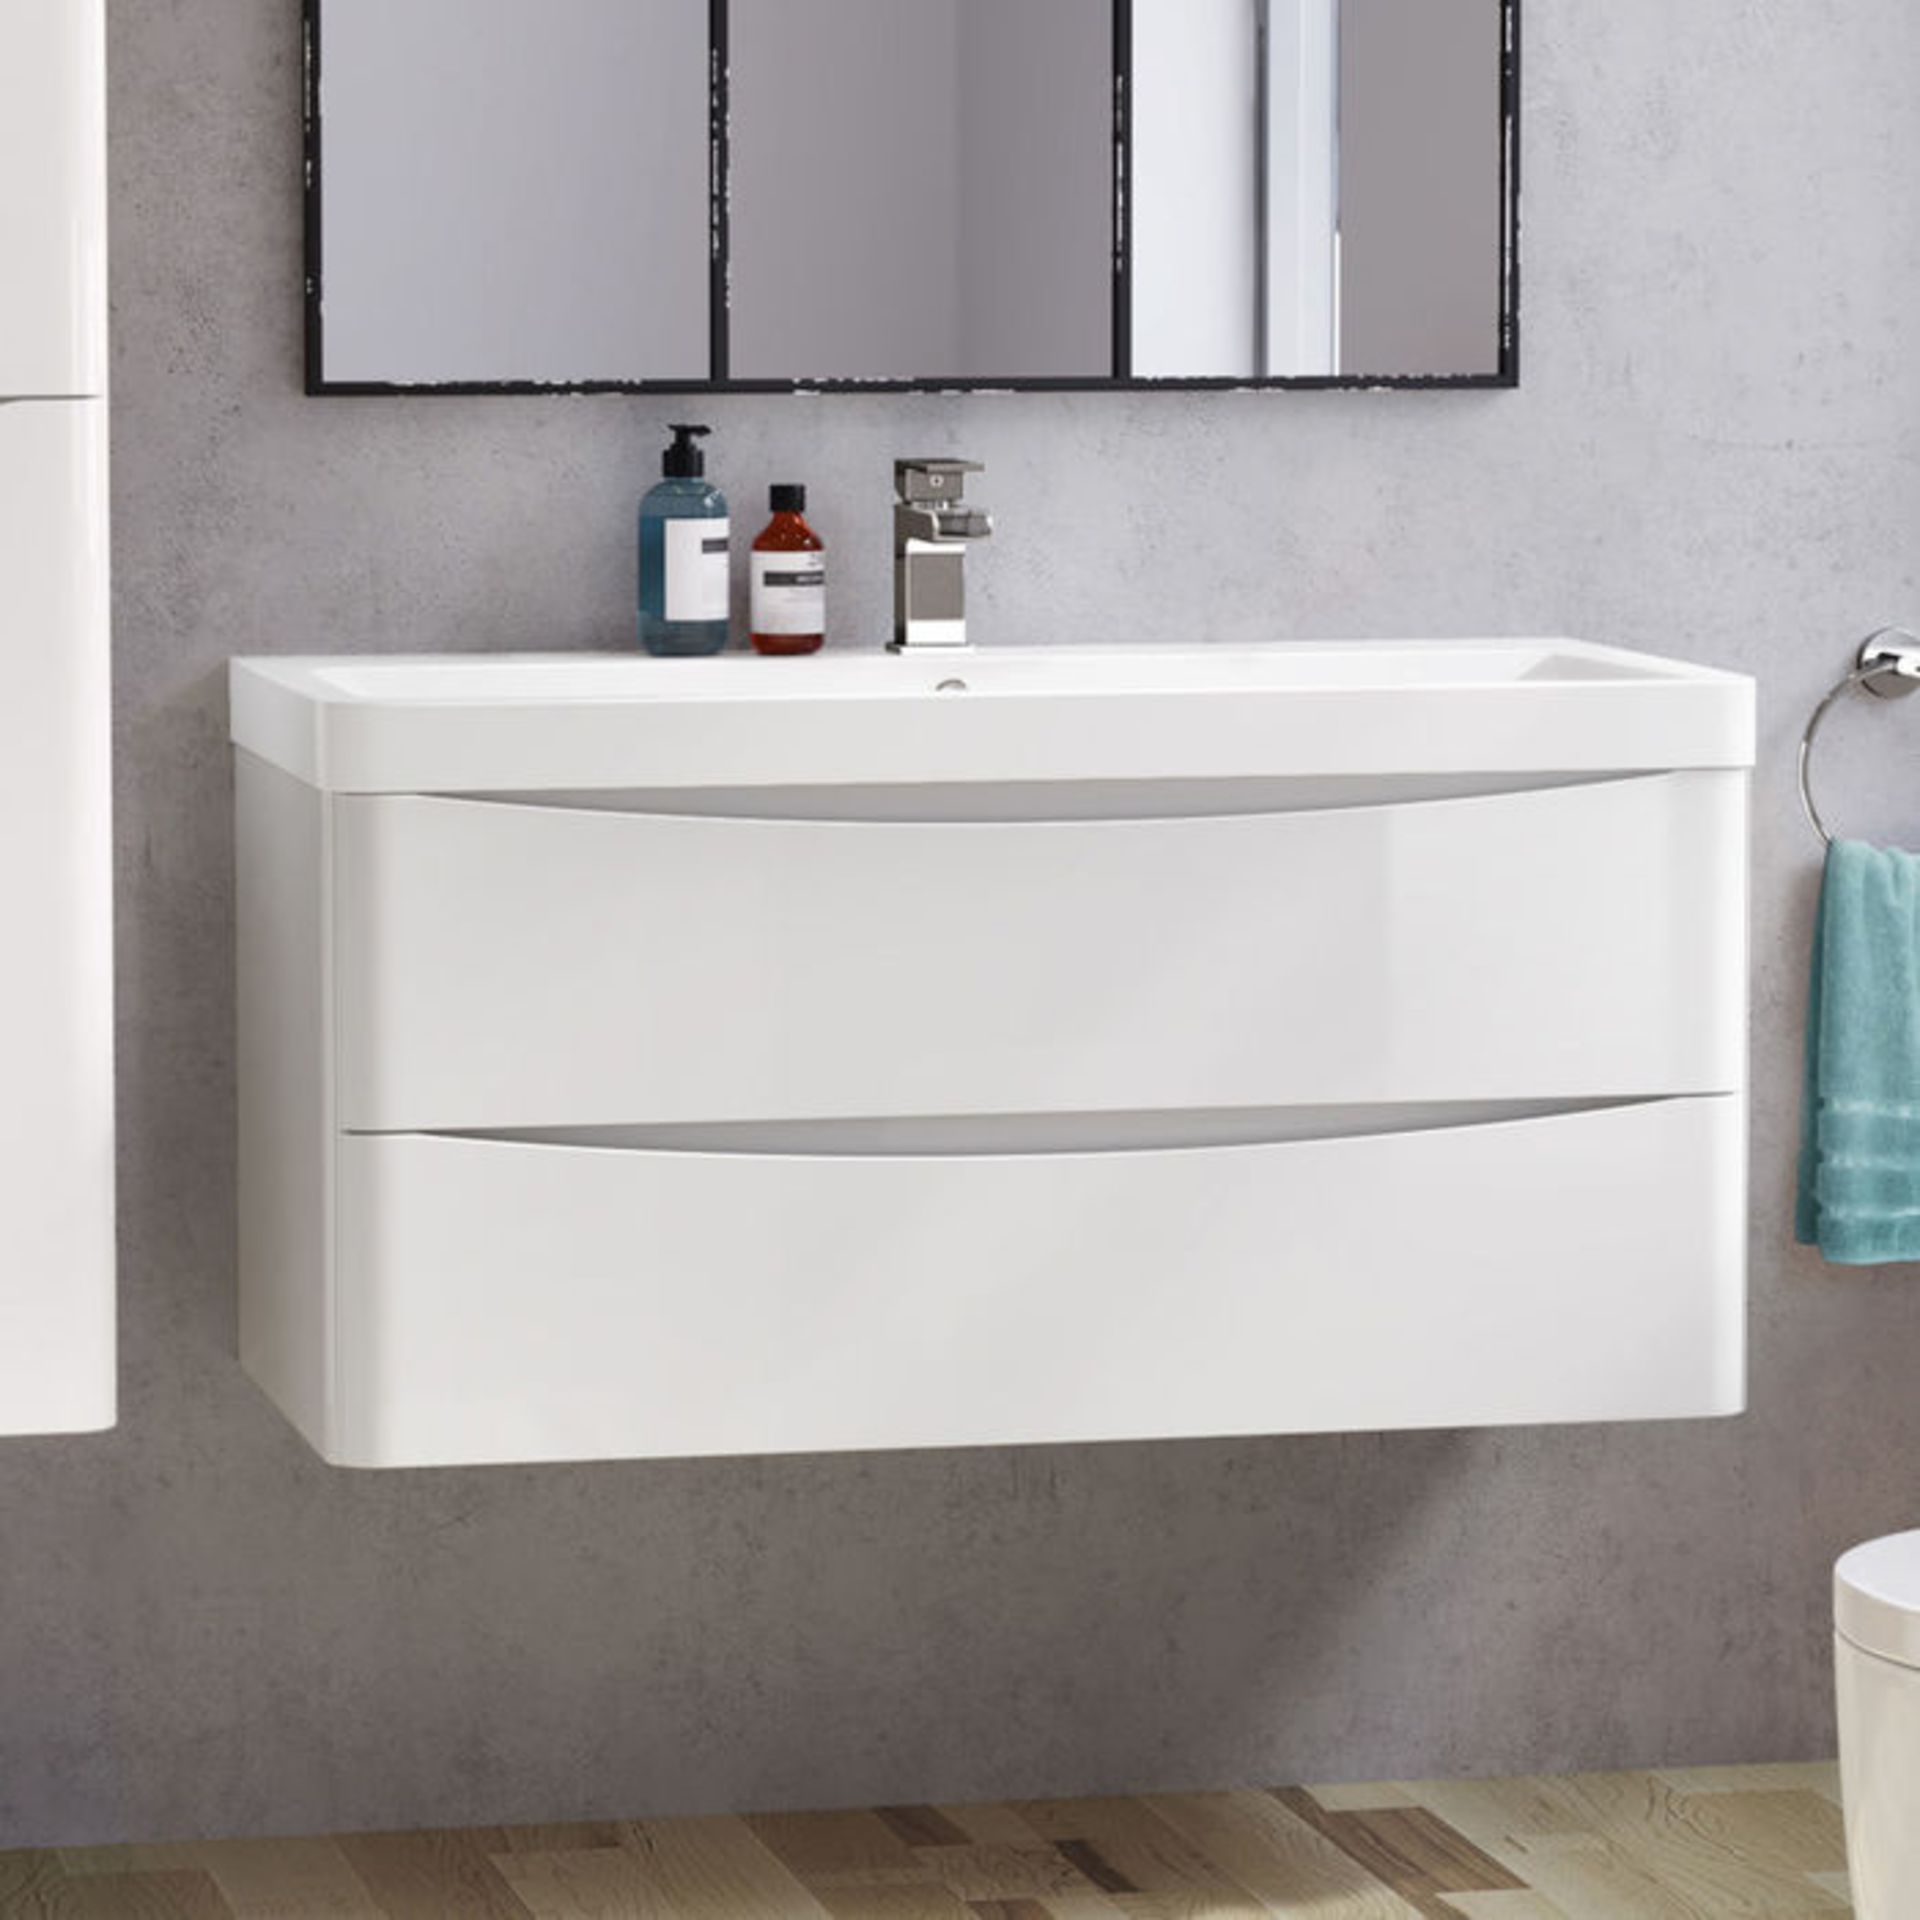 NEW & BOXED 1000mm Austin II Gloss White Built In Basin Drawer Unit - Wall Hung. RRP £999.99.C...